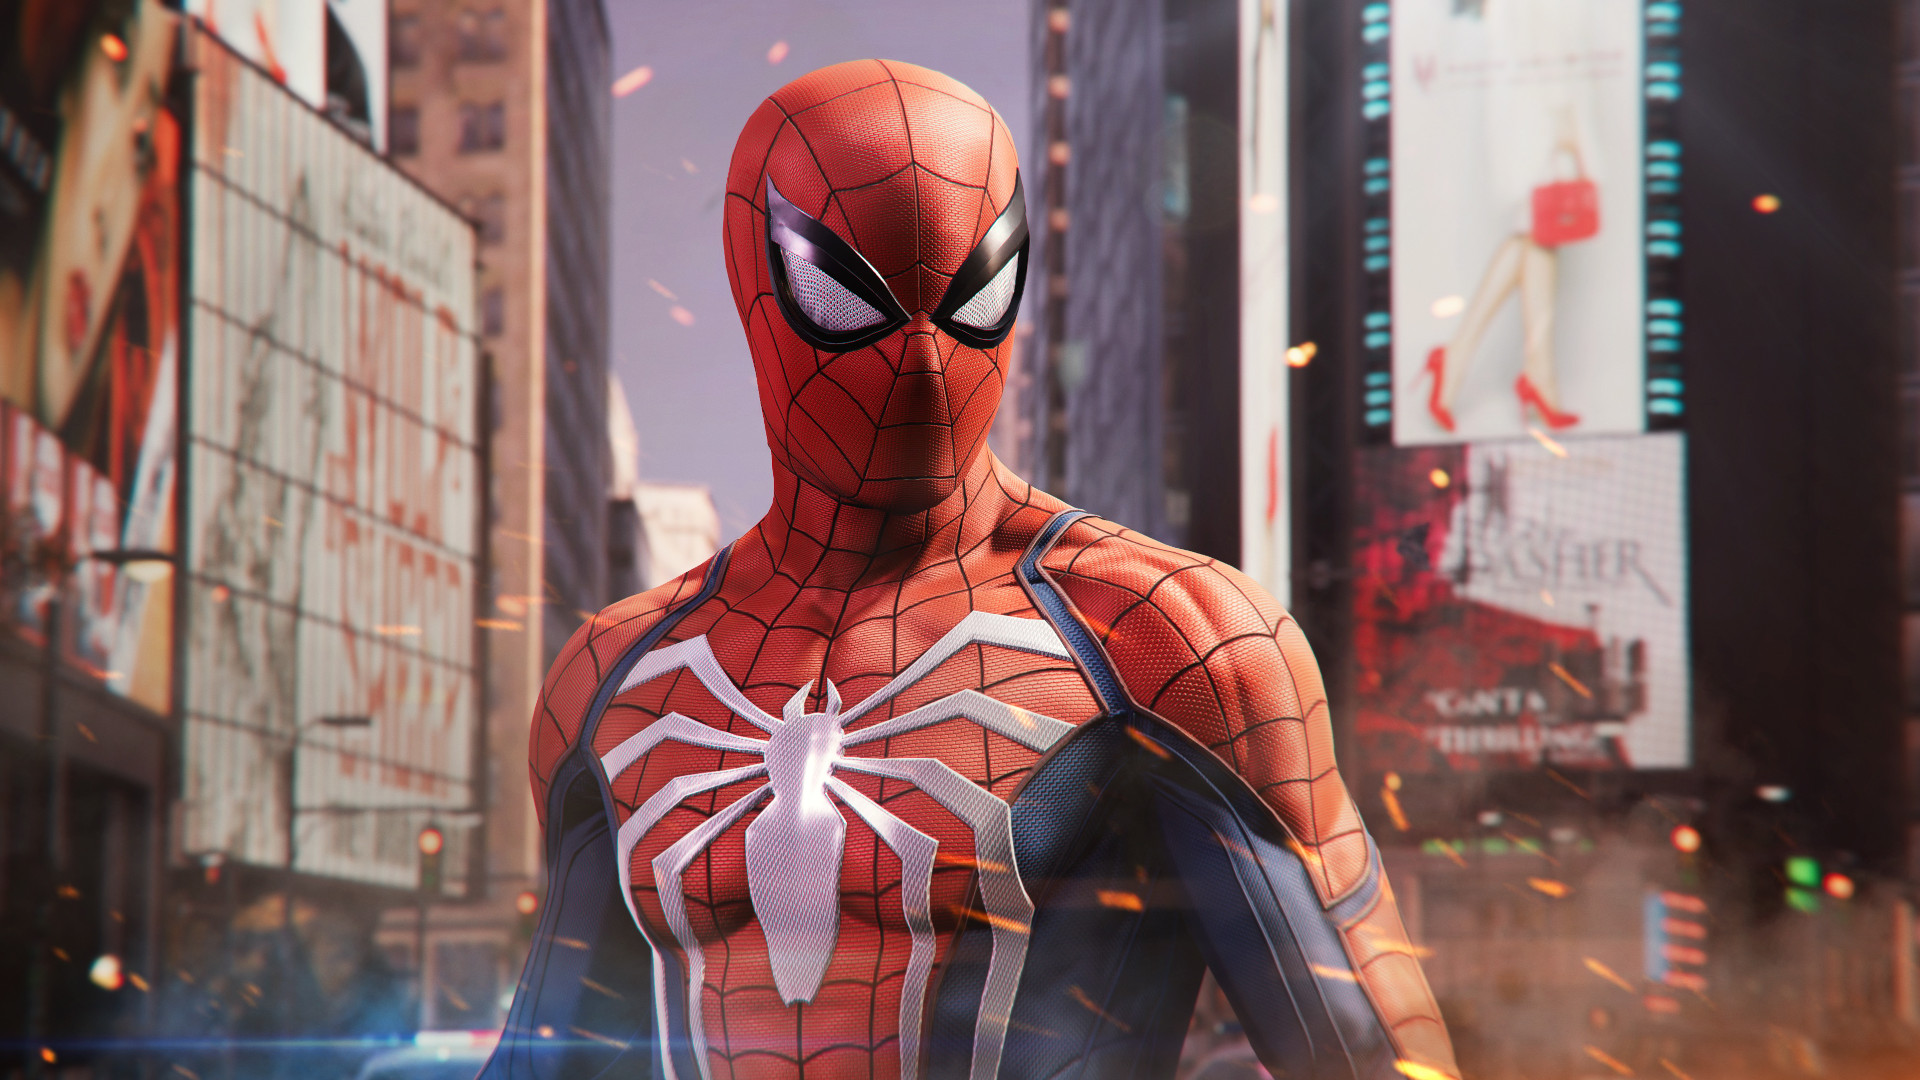 Marvel's Spider-Man Remastered Coming to PC in August